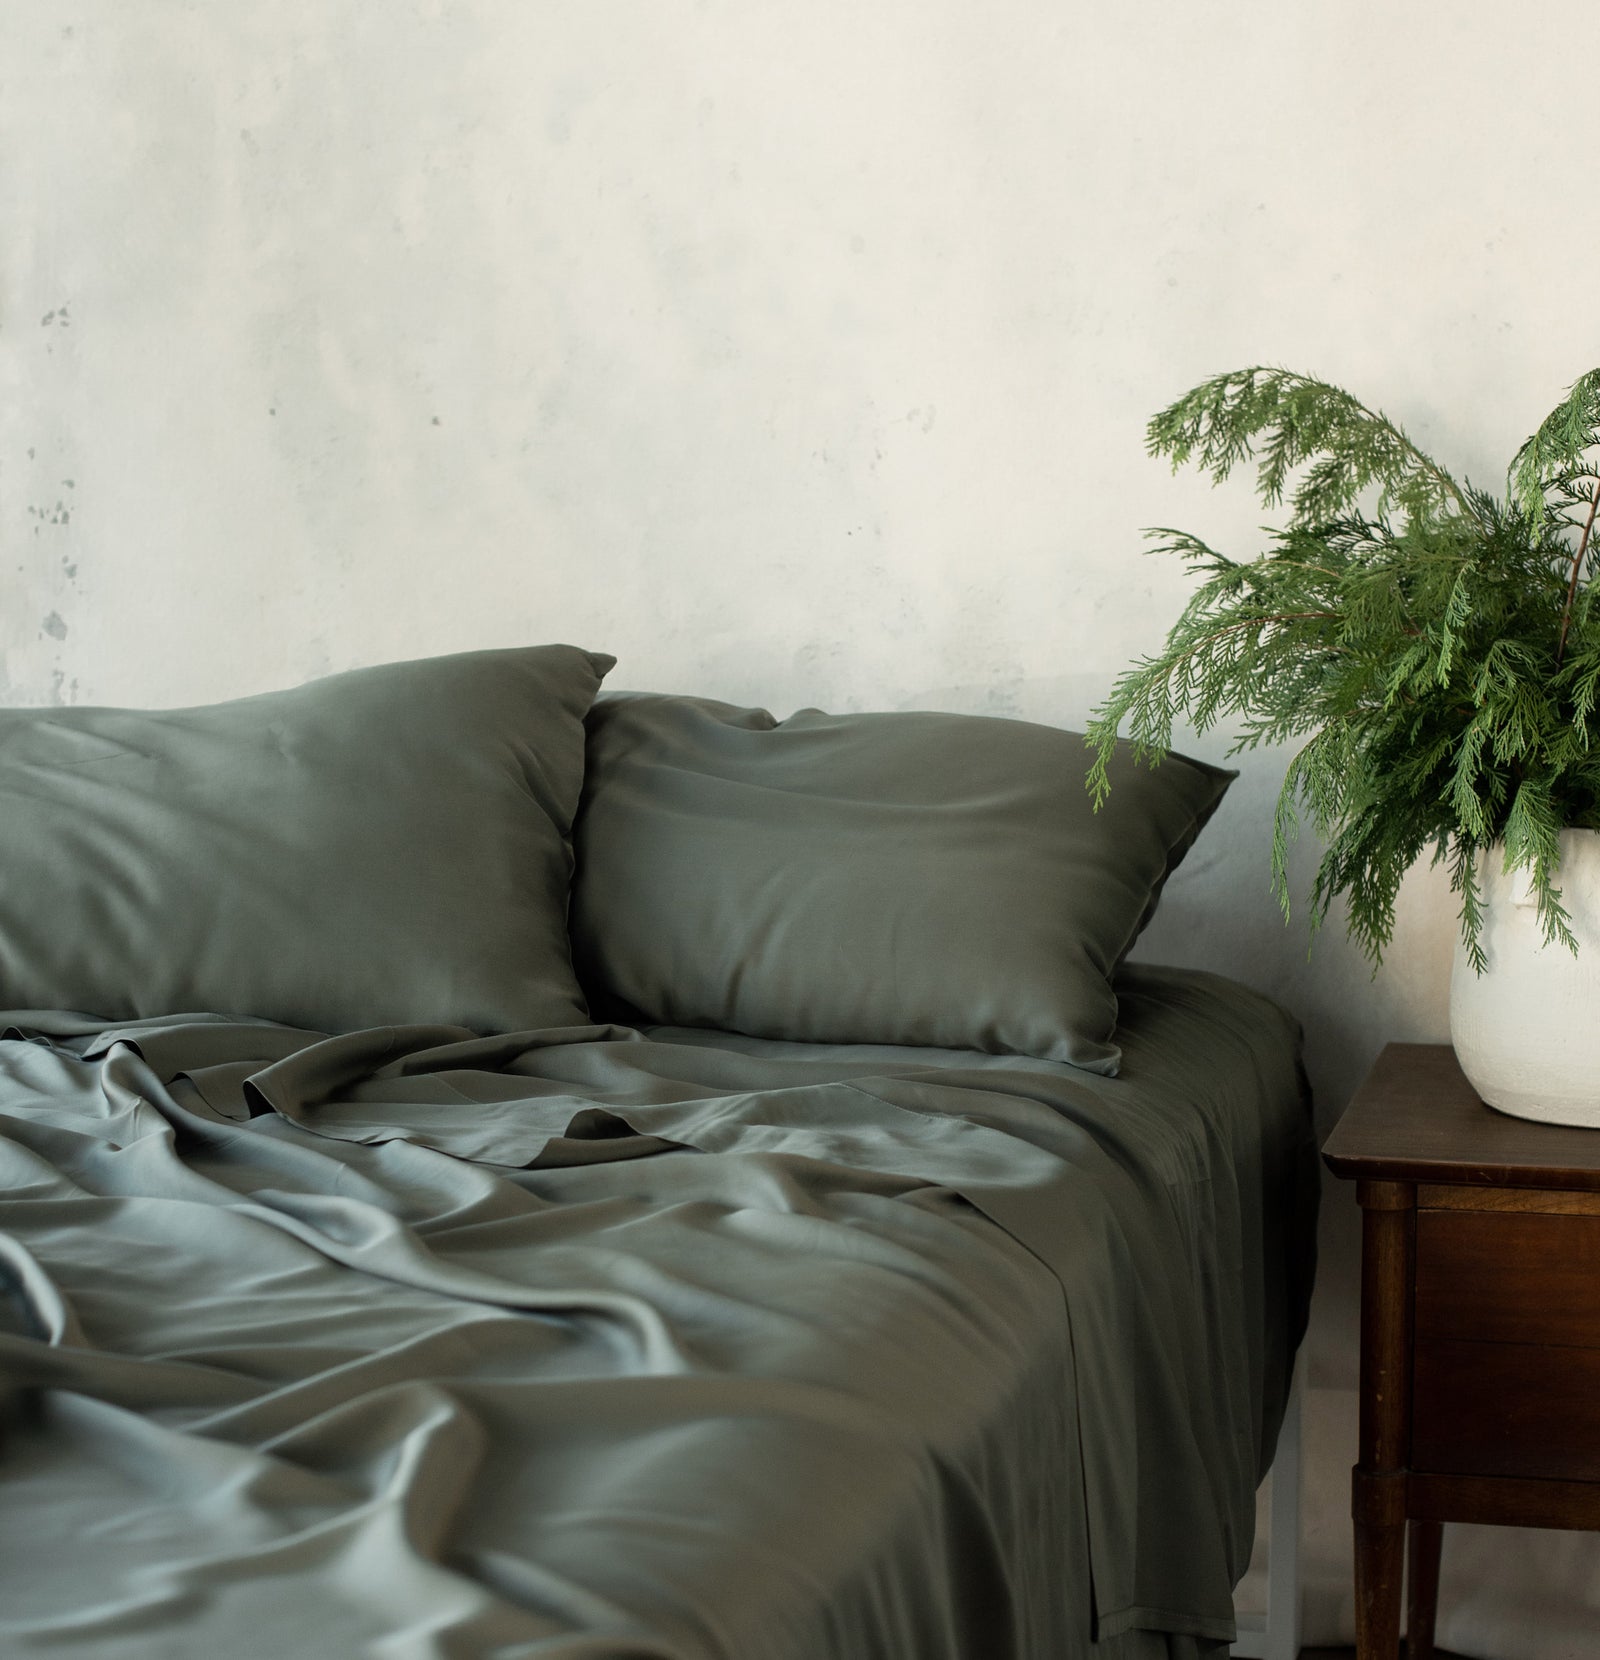 Unmade bed with olive bedding and a plant on the nightstand 